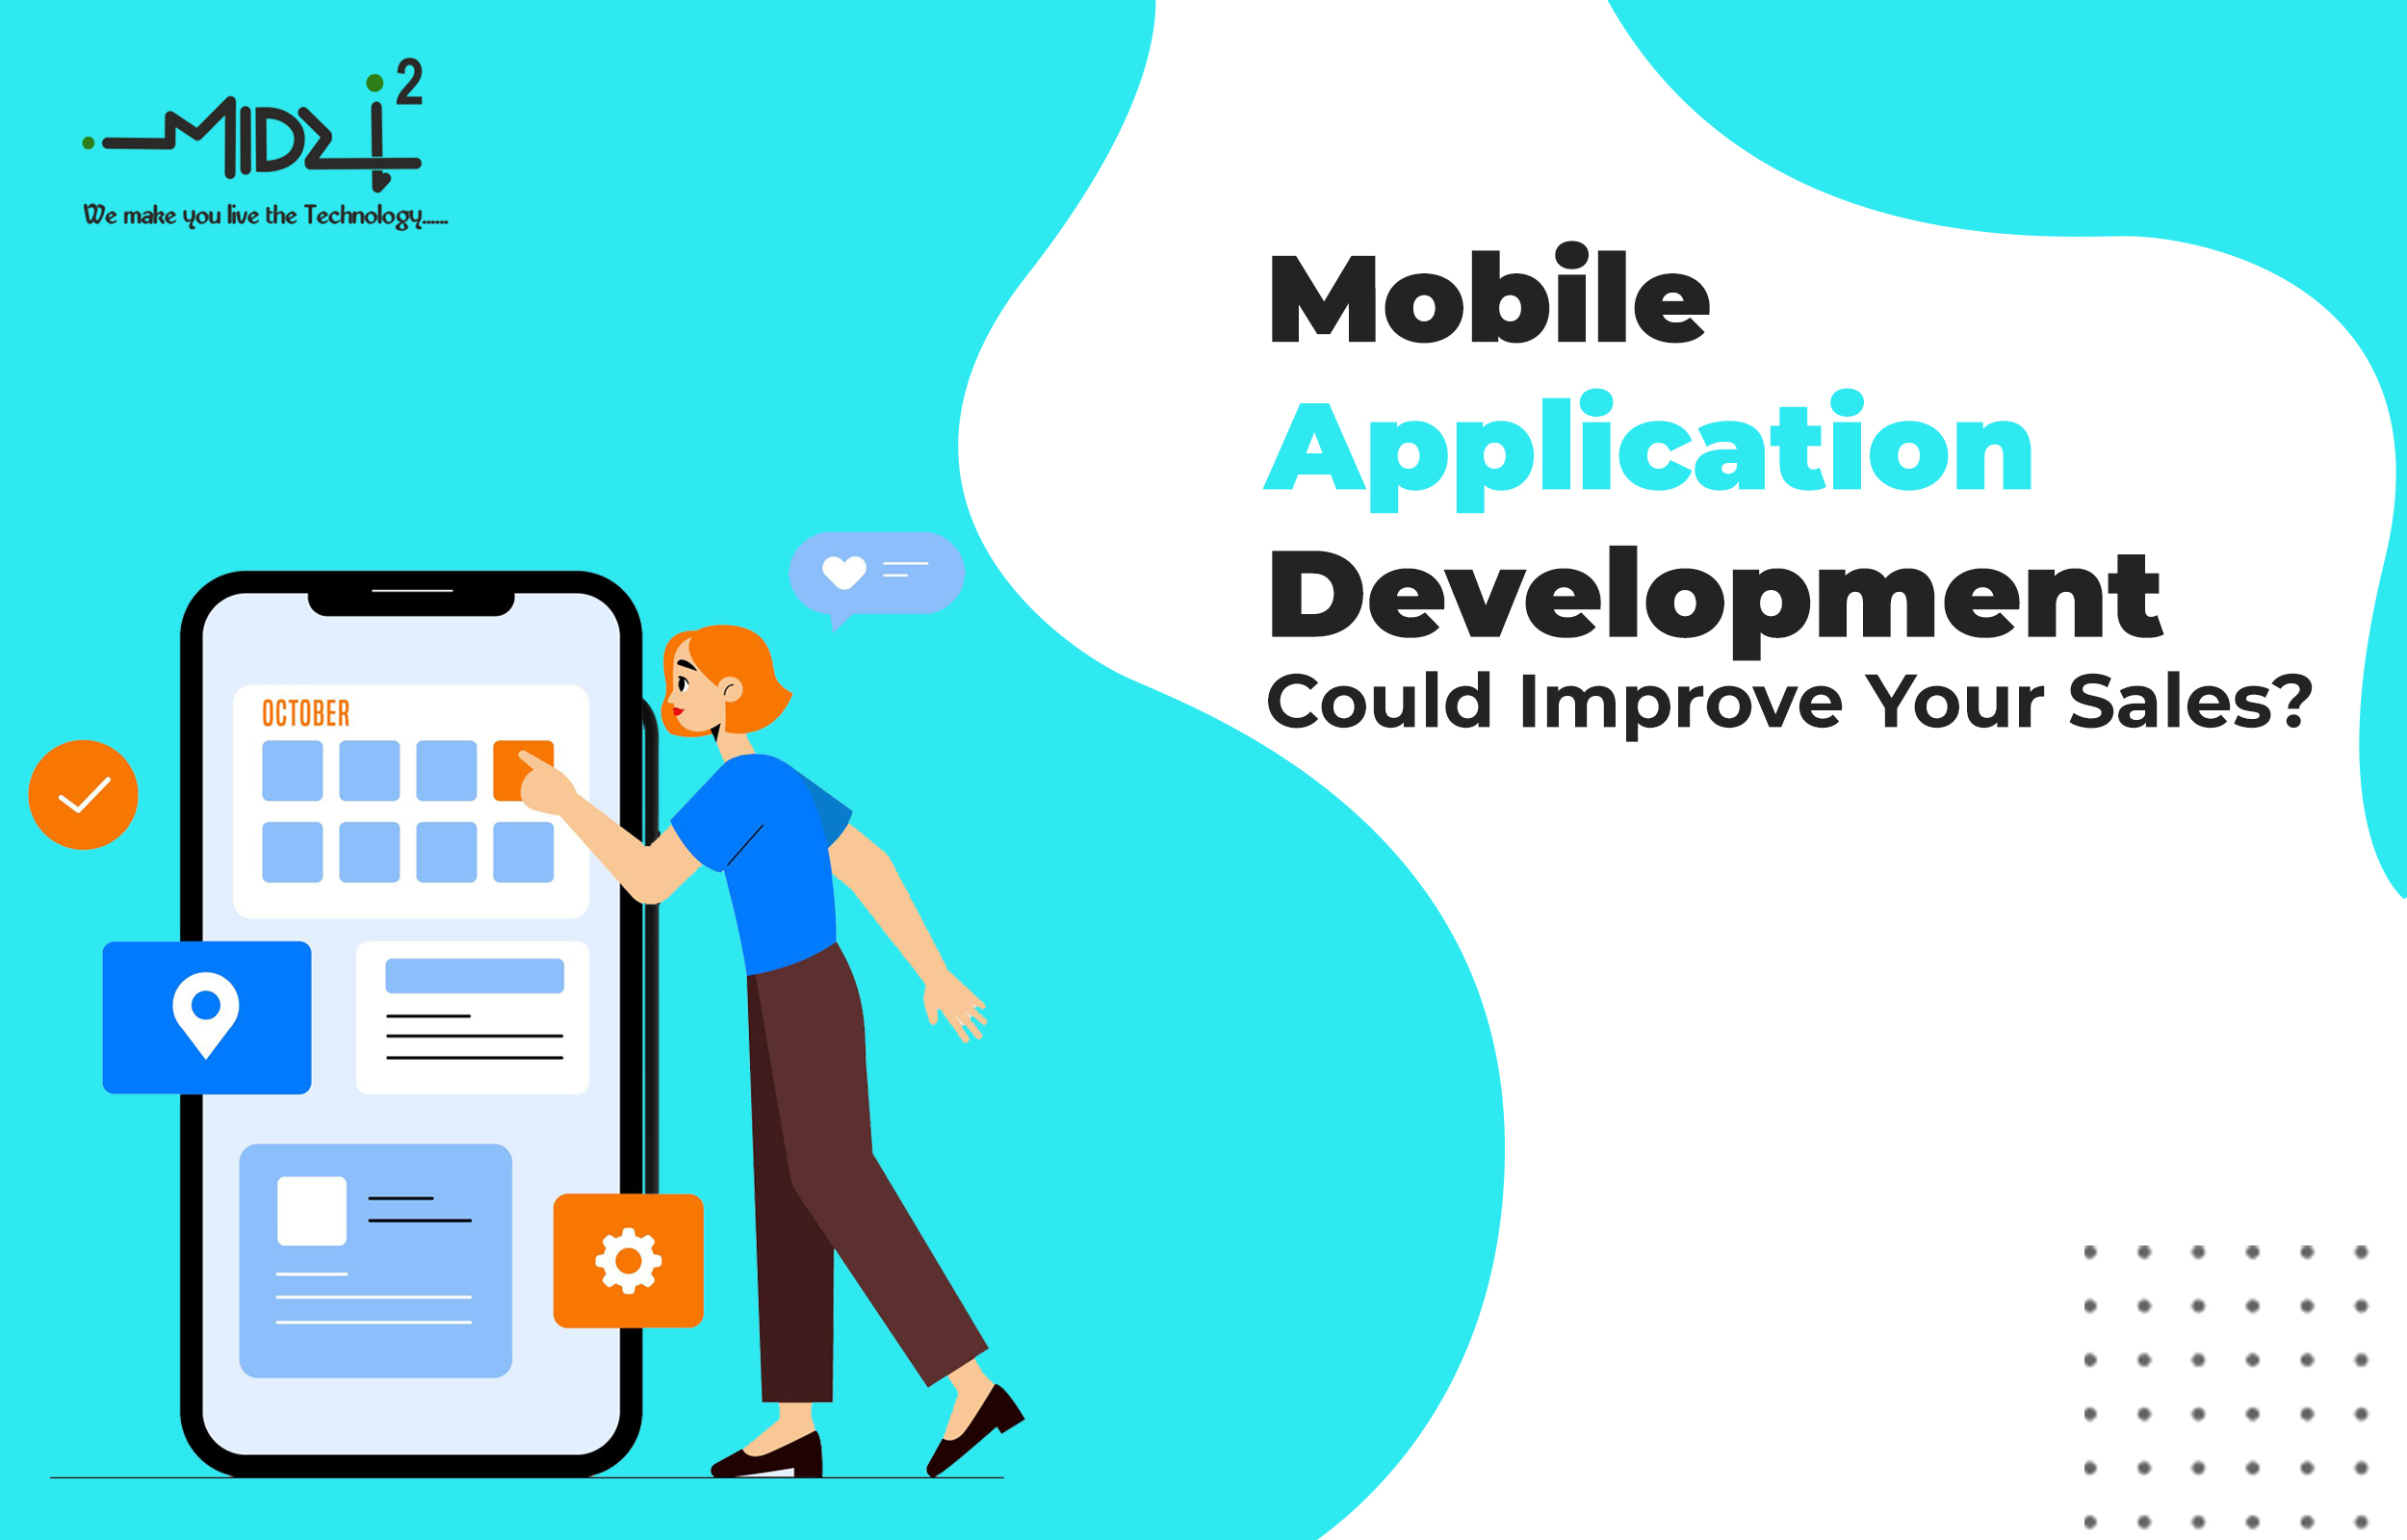 How Mobile Application Development Could Improve Your Sales?